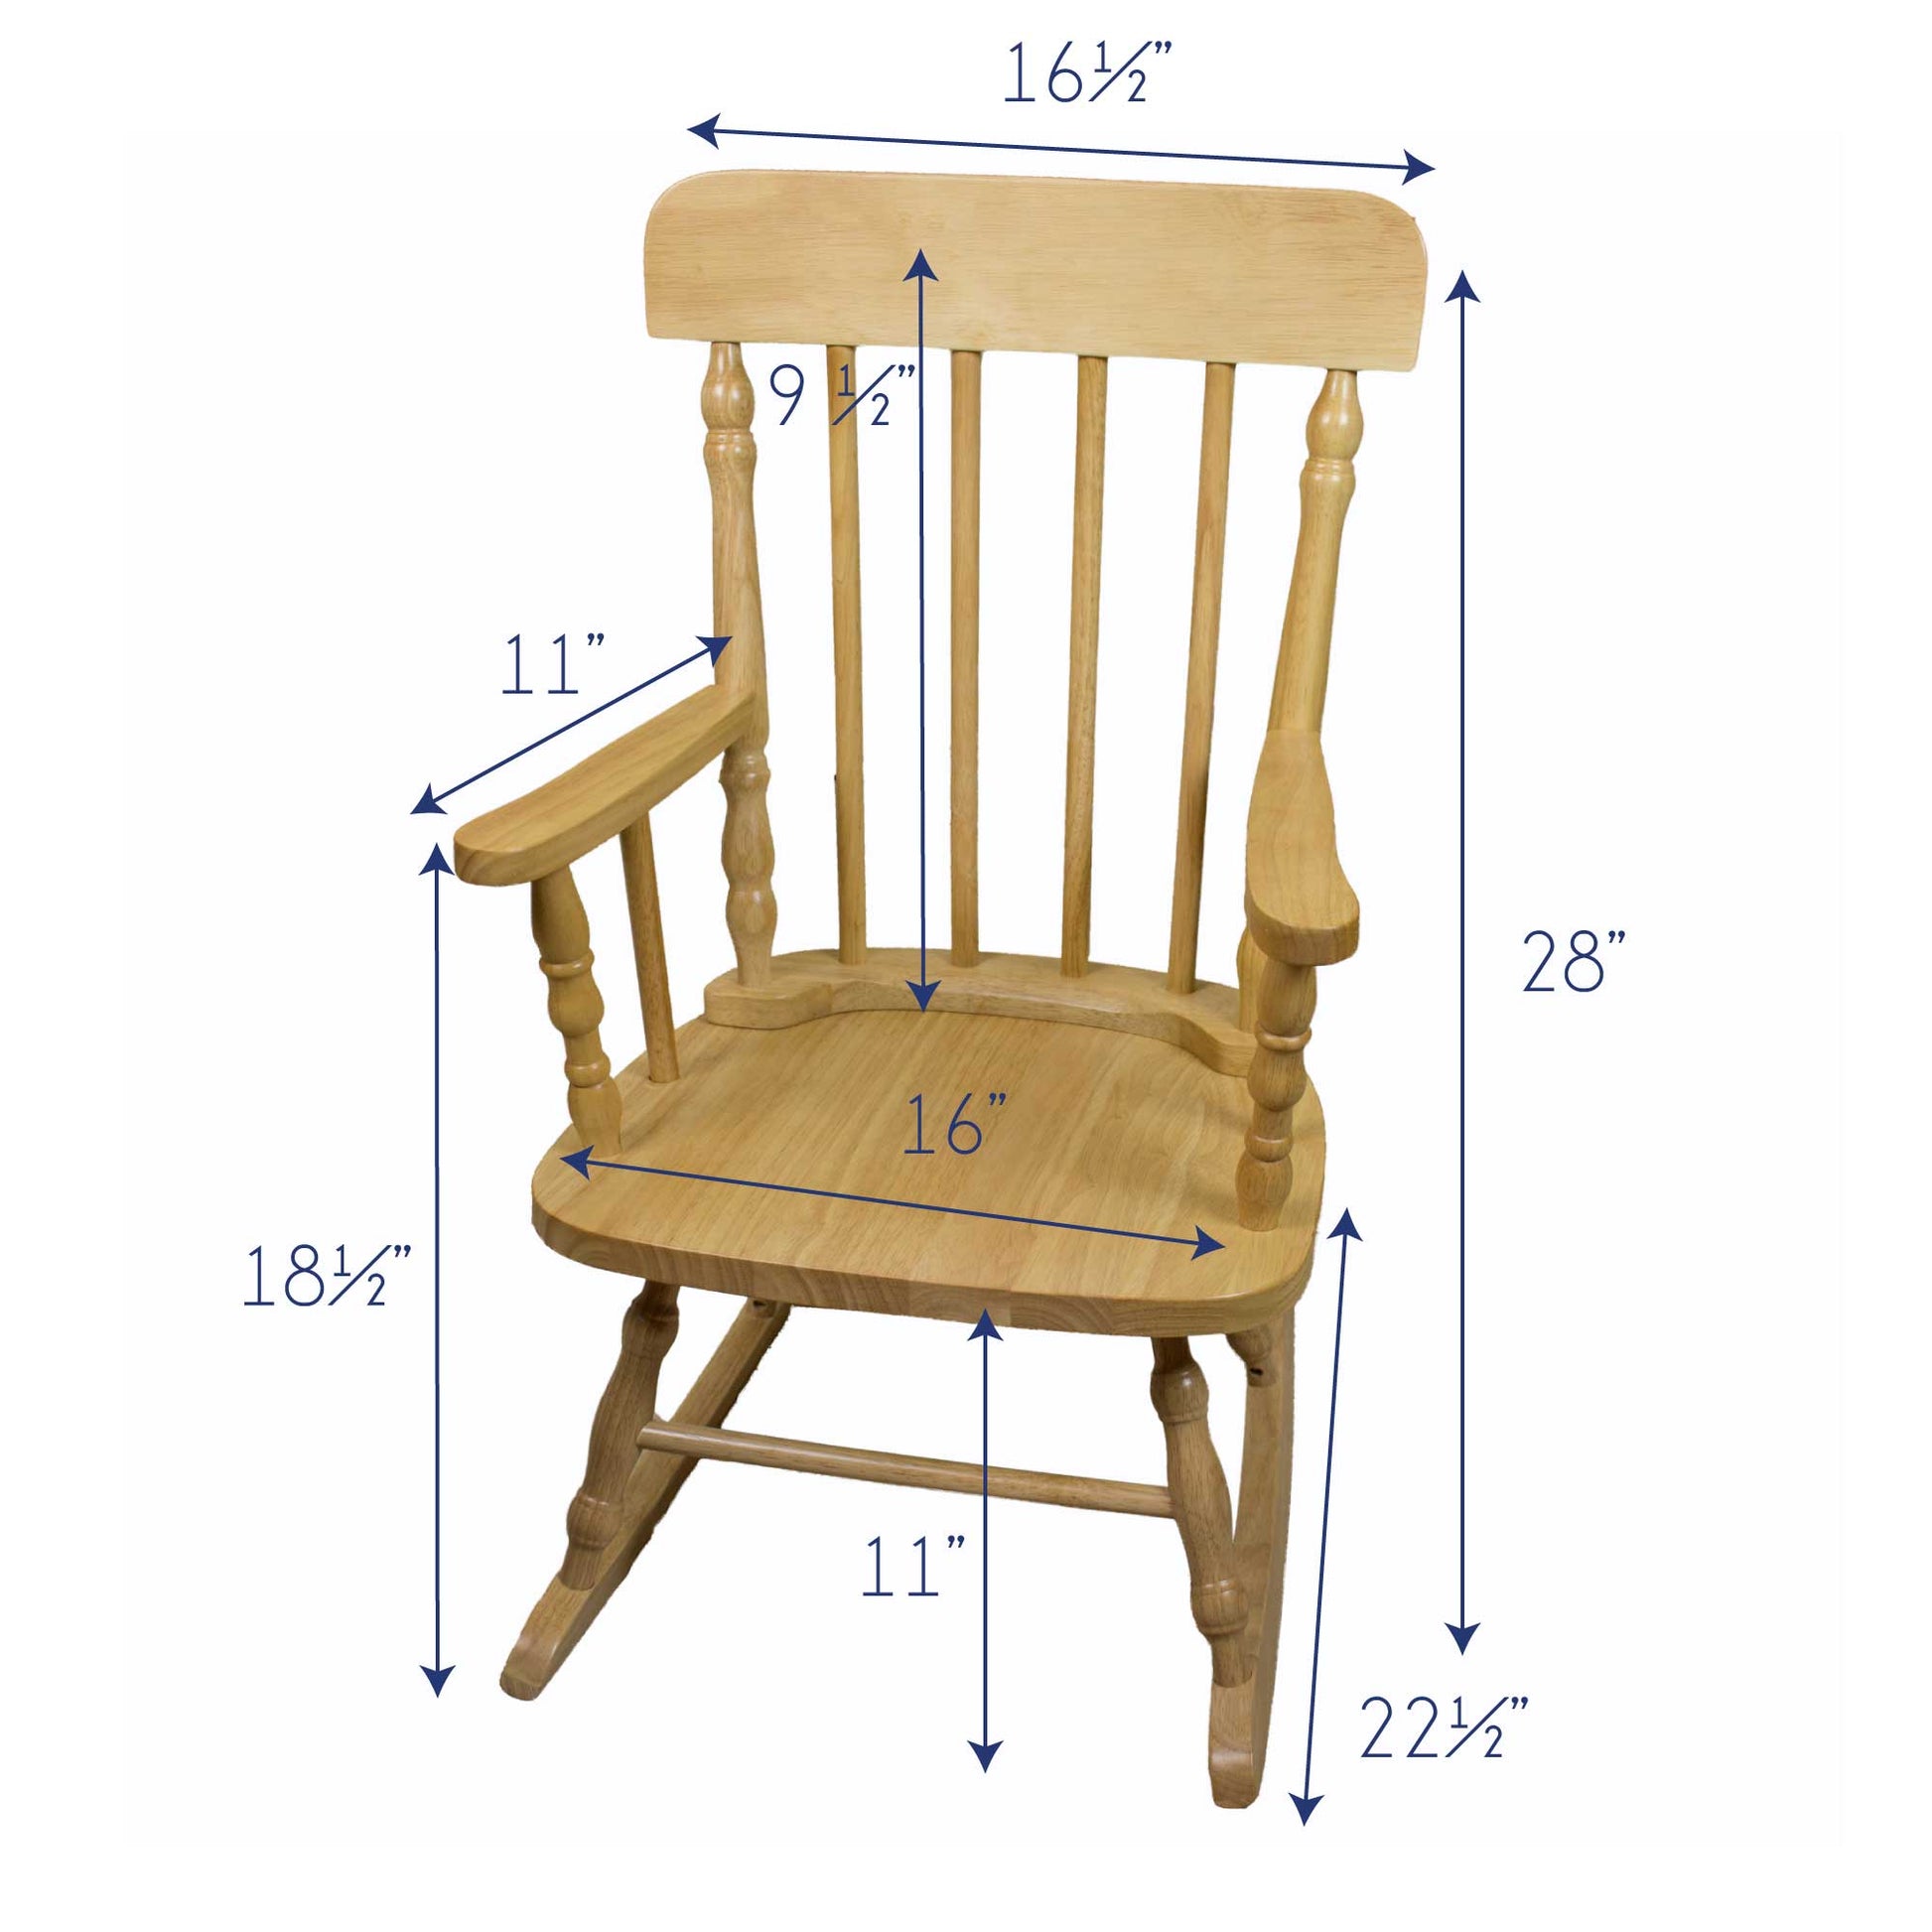 Boy's Rock Star Natural Spindle Rocking Chair